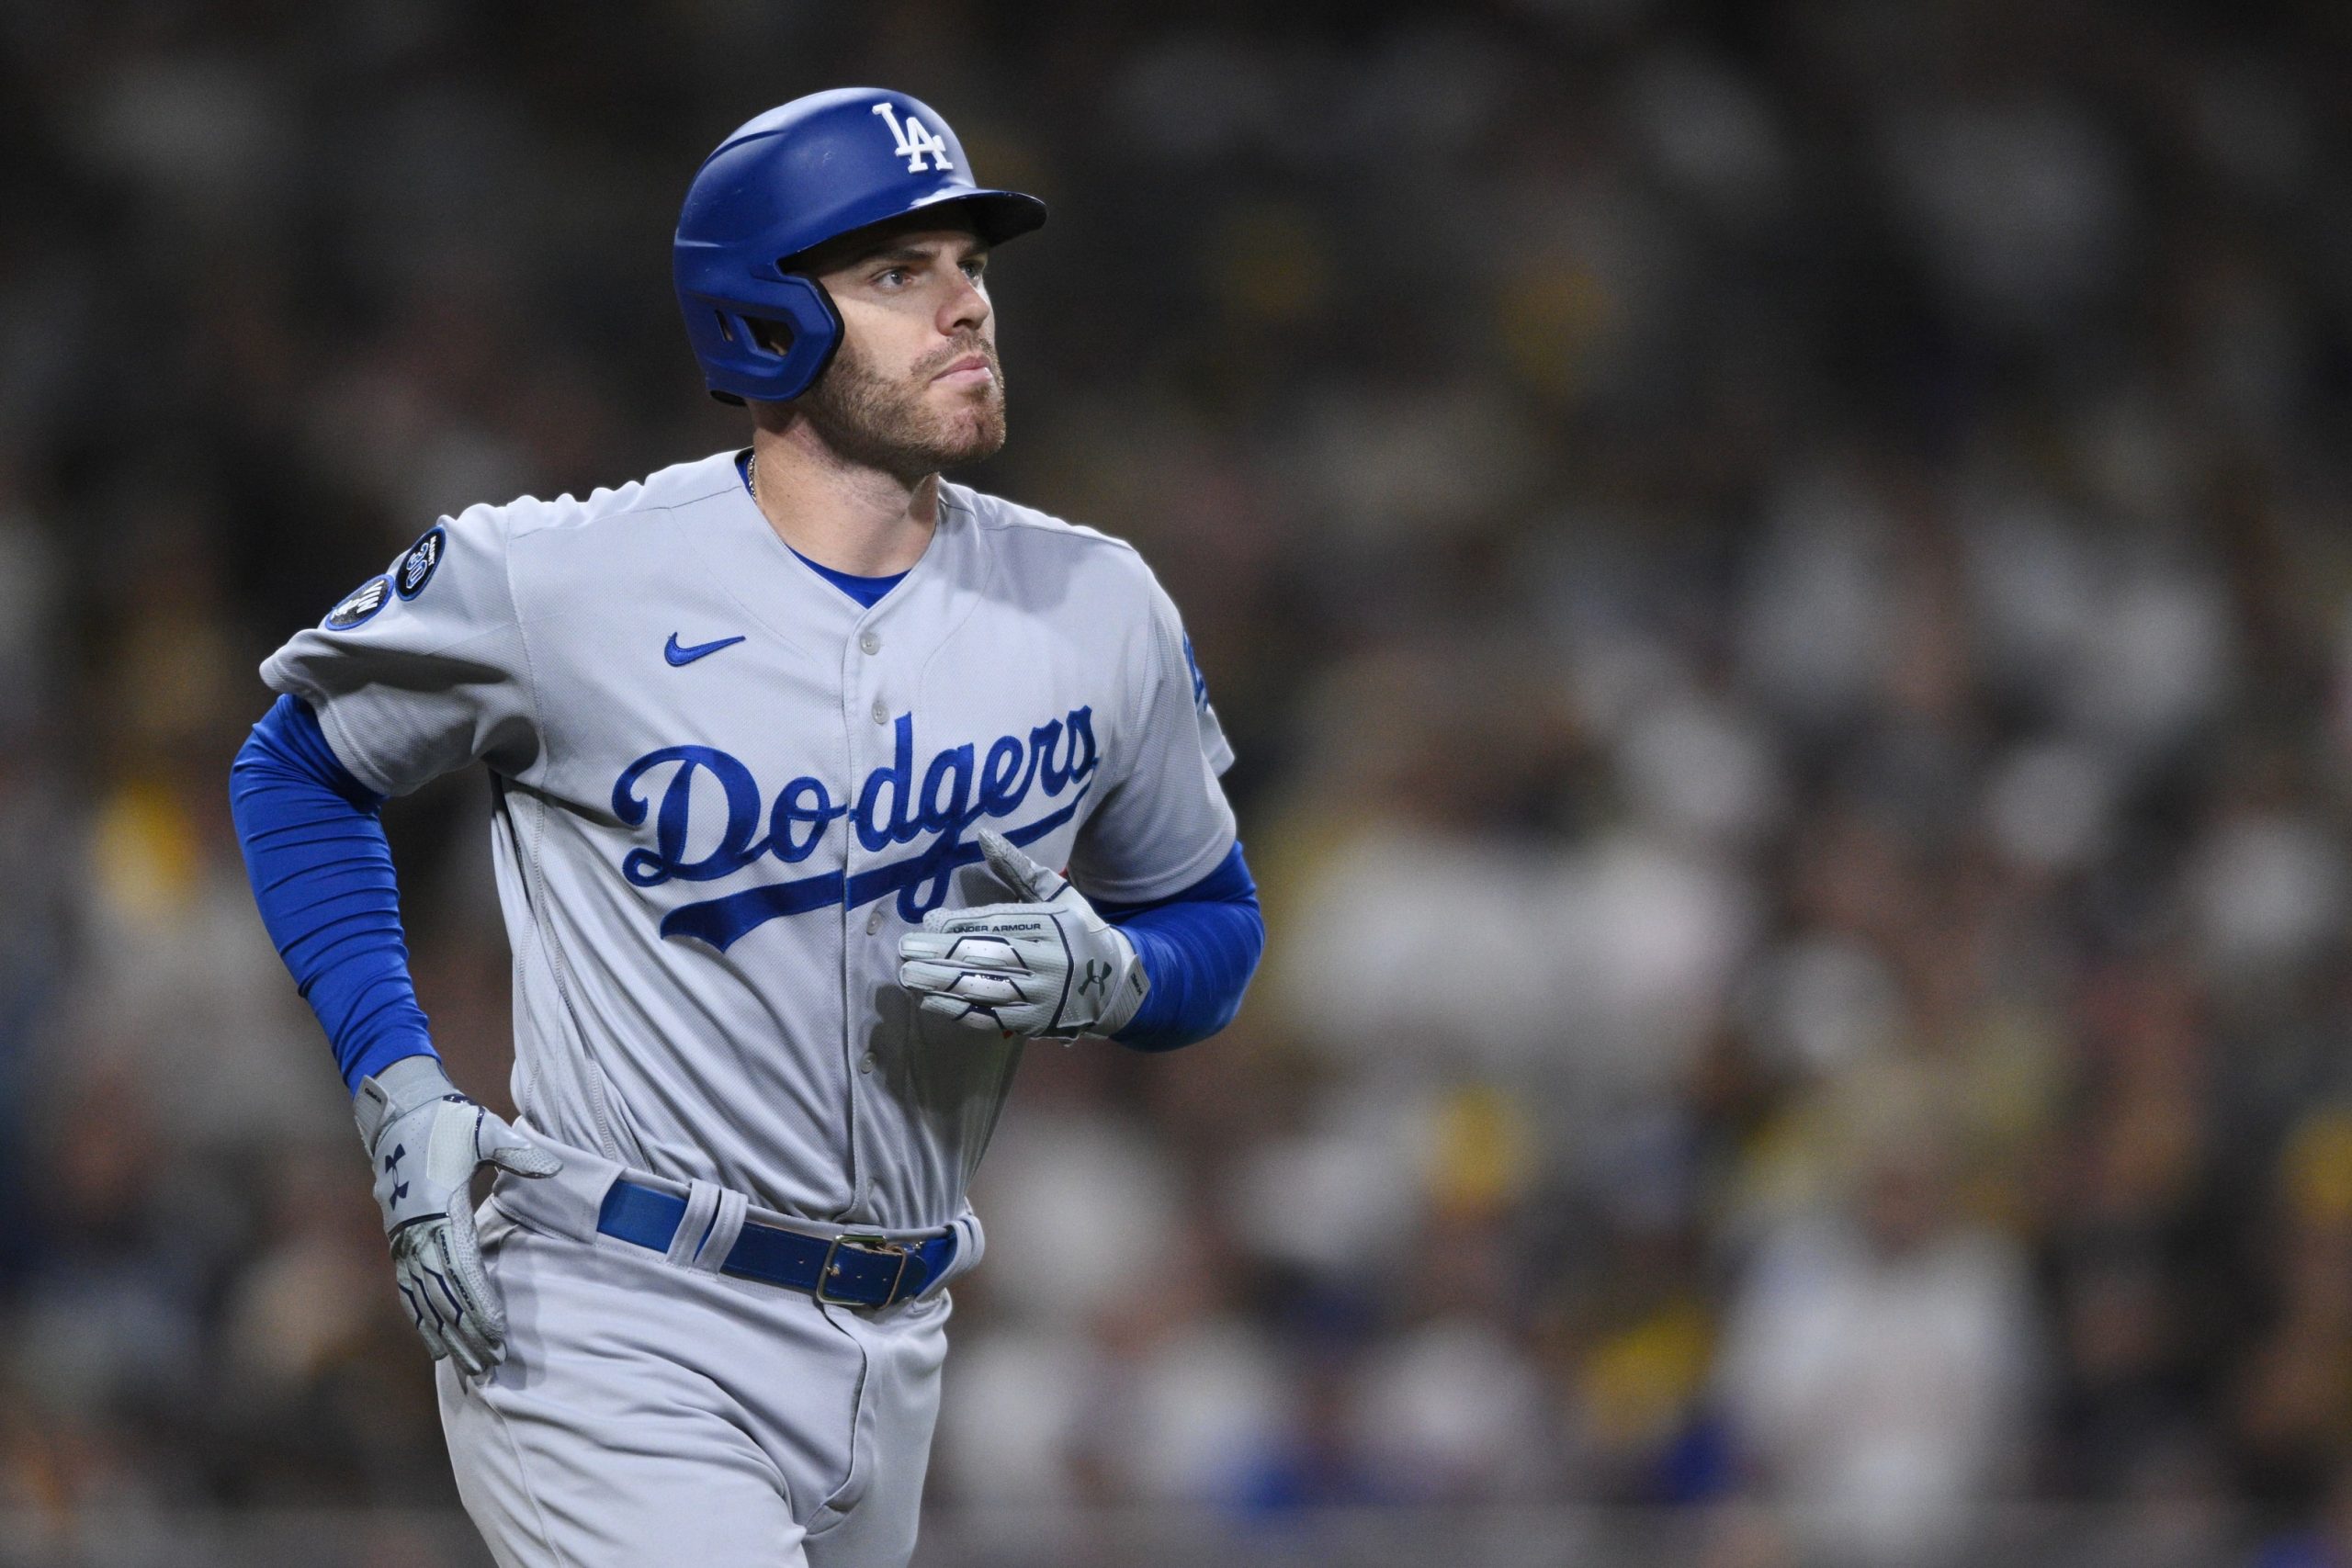 MLB Playoffs Dodgers vs Padres Game 4: Same game parlay at +550